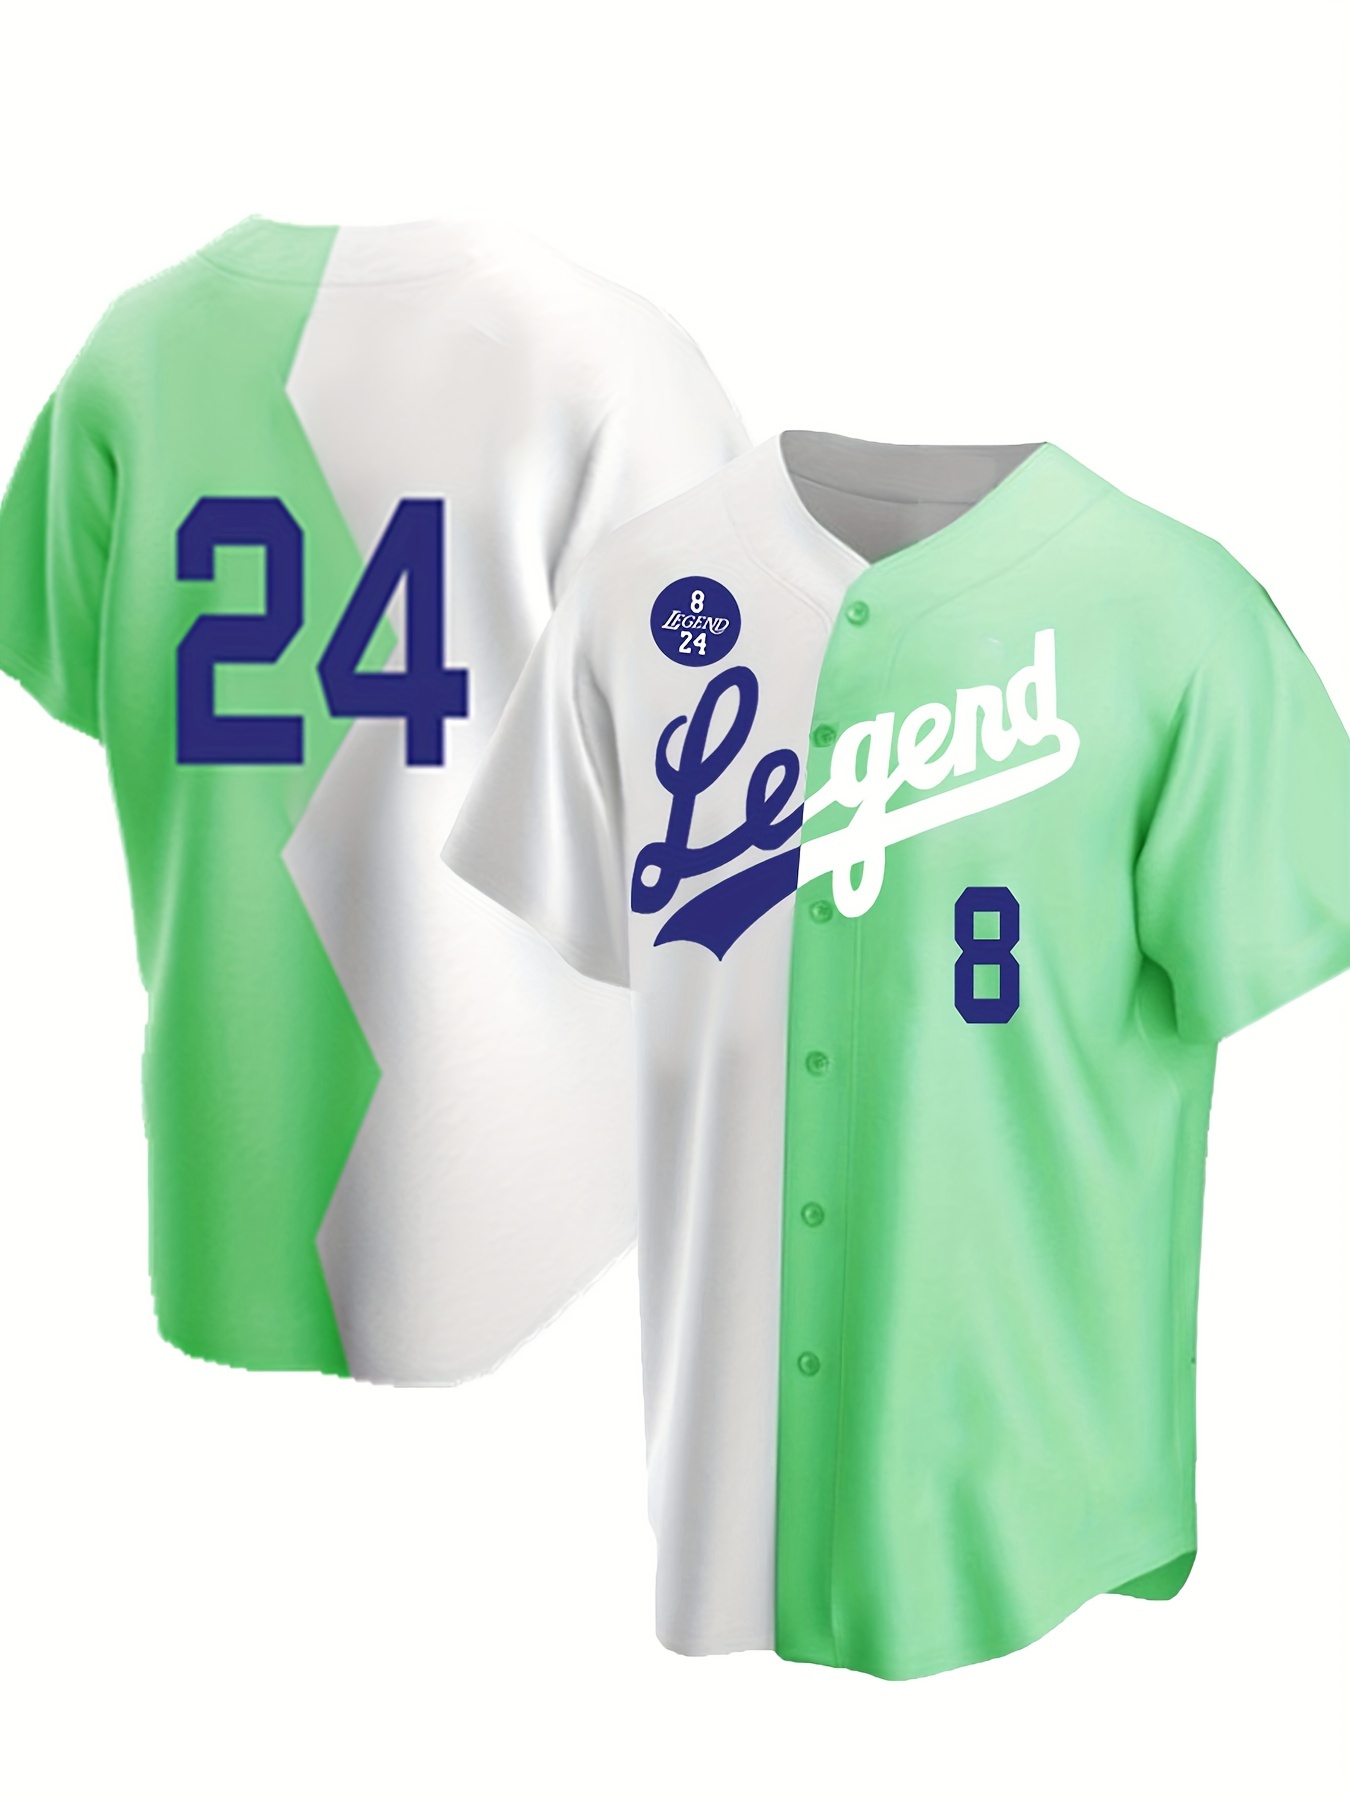 Men's #8 24 Black Legend Baseball Jersey, Classic Baseball Shirt, Breathable Embroidery Stitching Sports Uniform for Training Competition S-XXXL